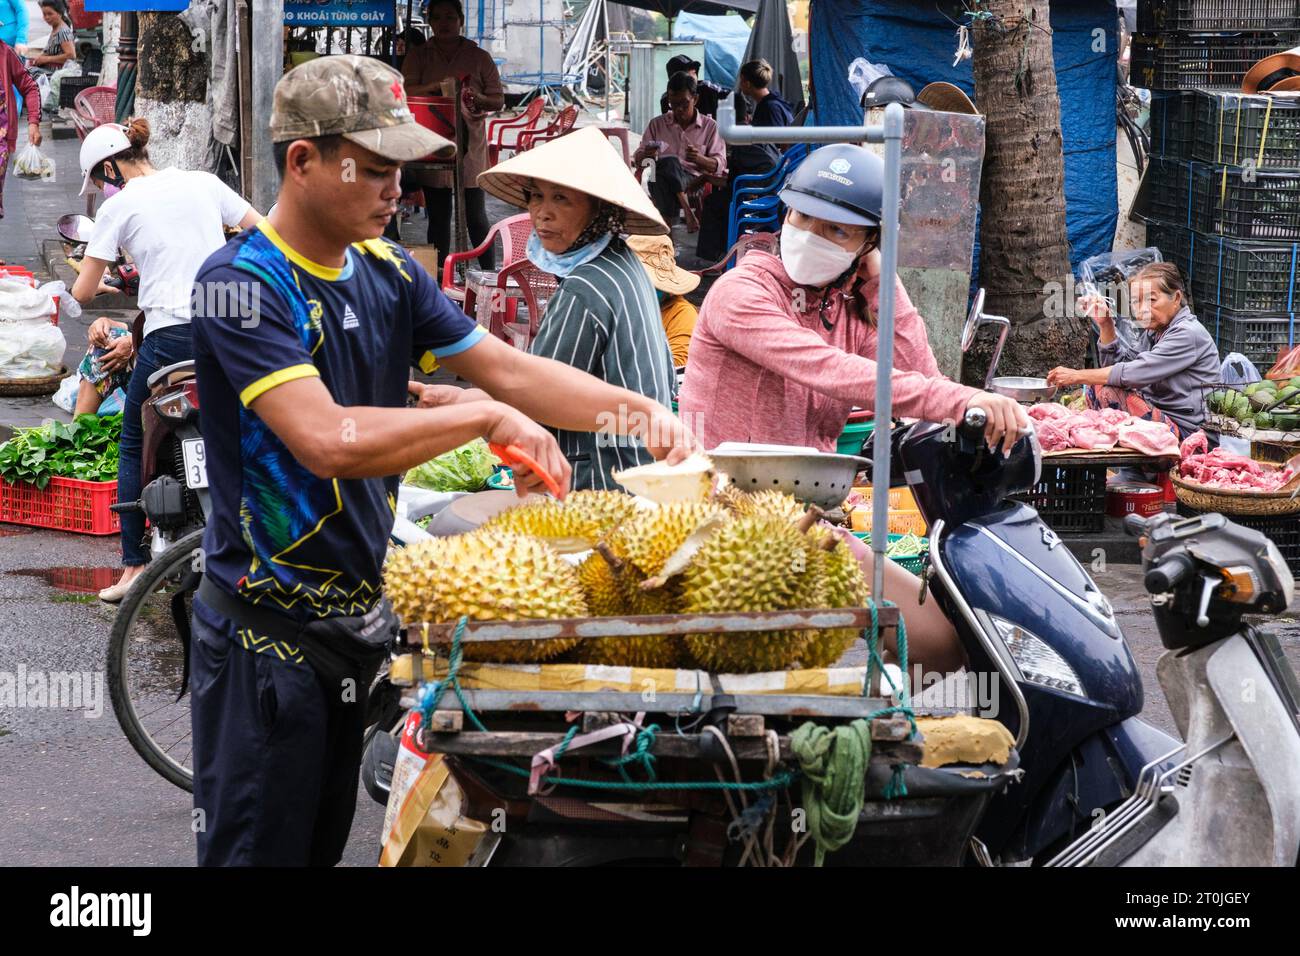 Hoi An, Vietnam. Vendor Selling Durian in the Market. Stock Photo